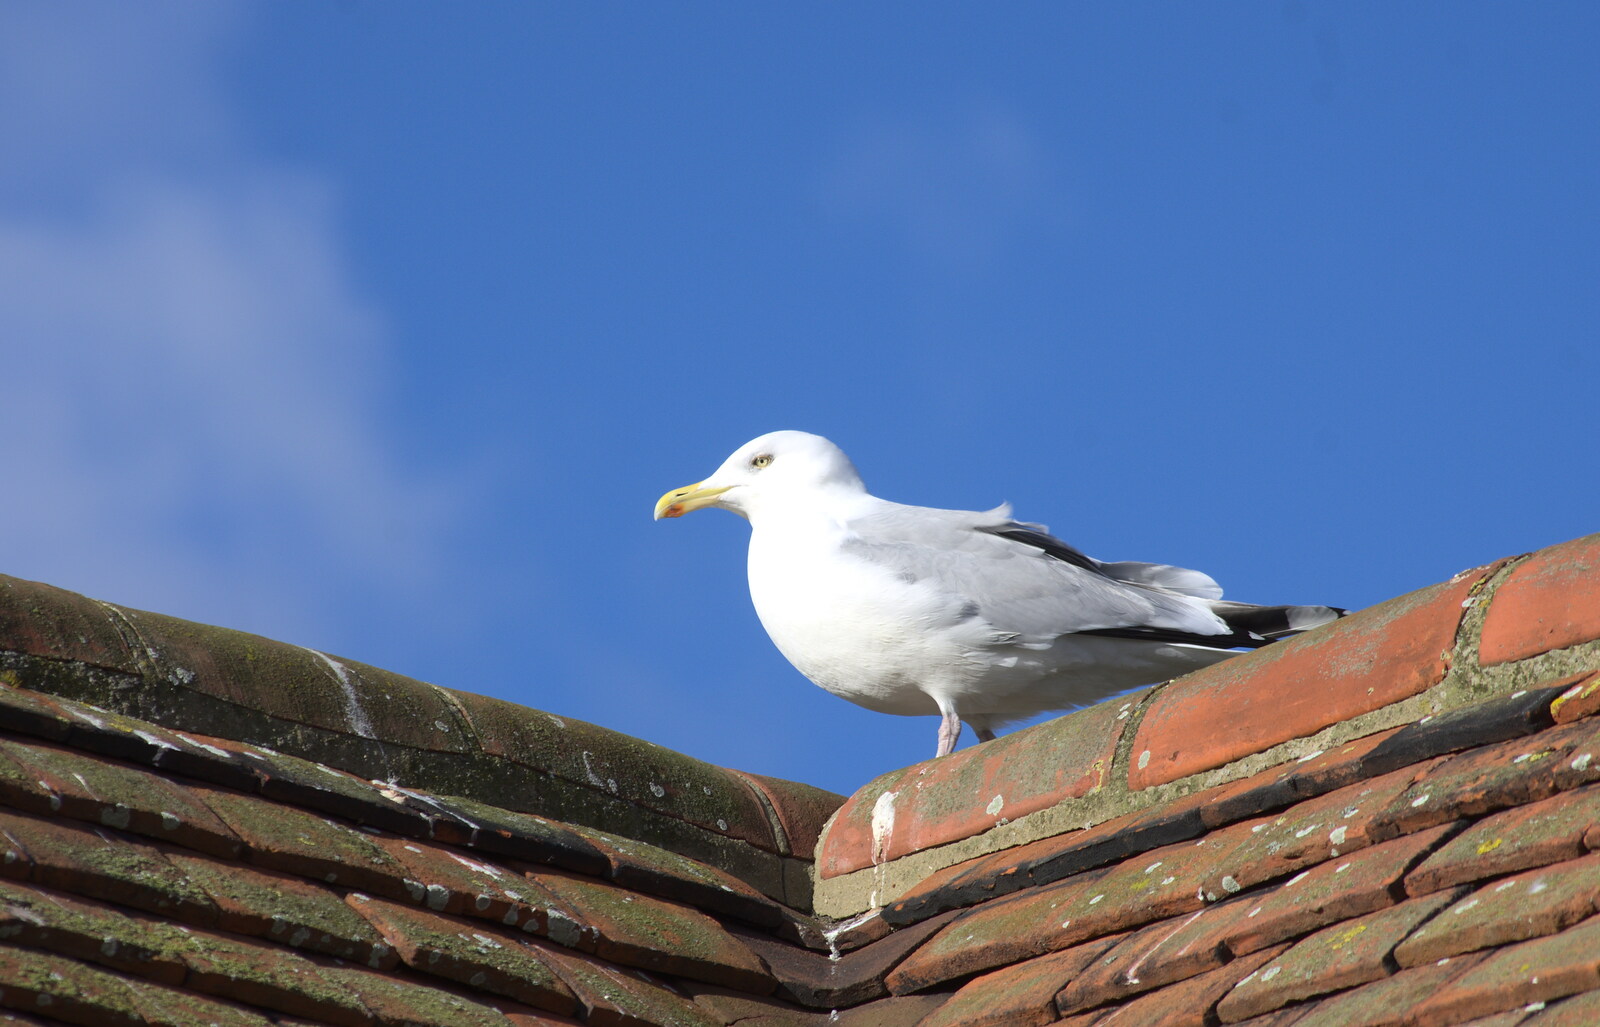 A Herring Gull looks serious from A Trip to Aldeburgh, Suffolk - 7th February 2016